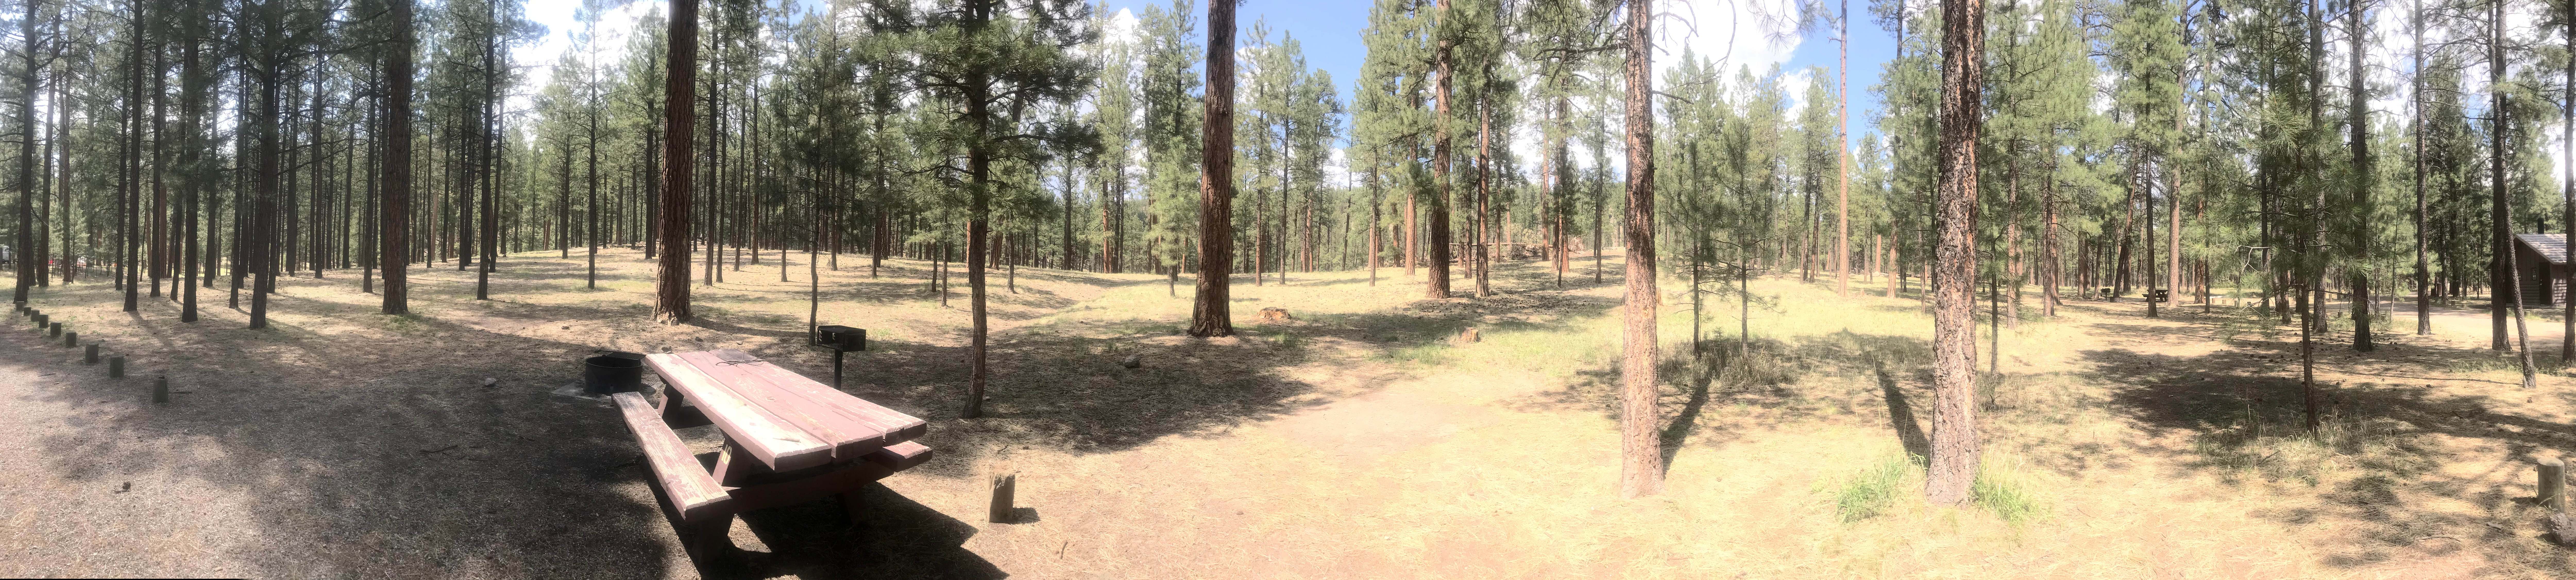 Camper submitted image from Jemez Falls Campground - 5